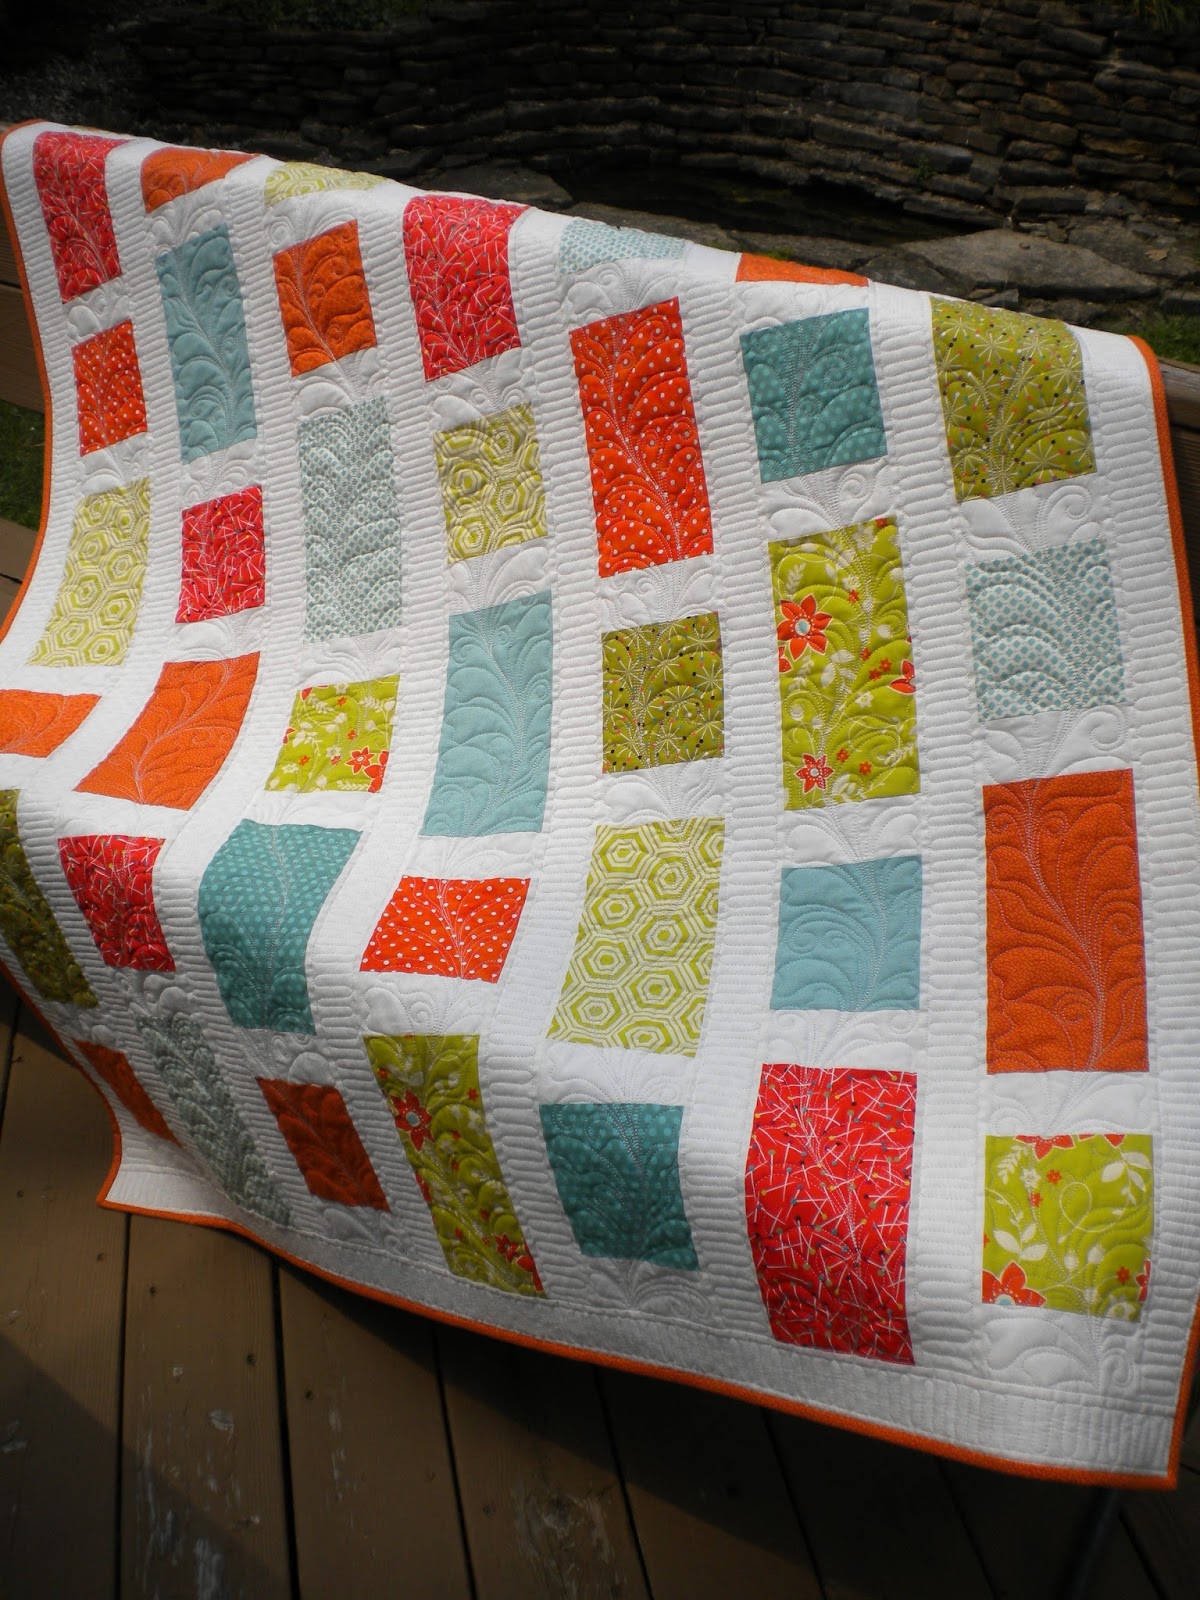 Vicki's Crafts and Quilting: A Cobblestone Path-finish